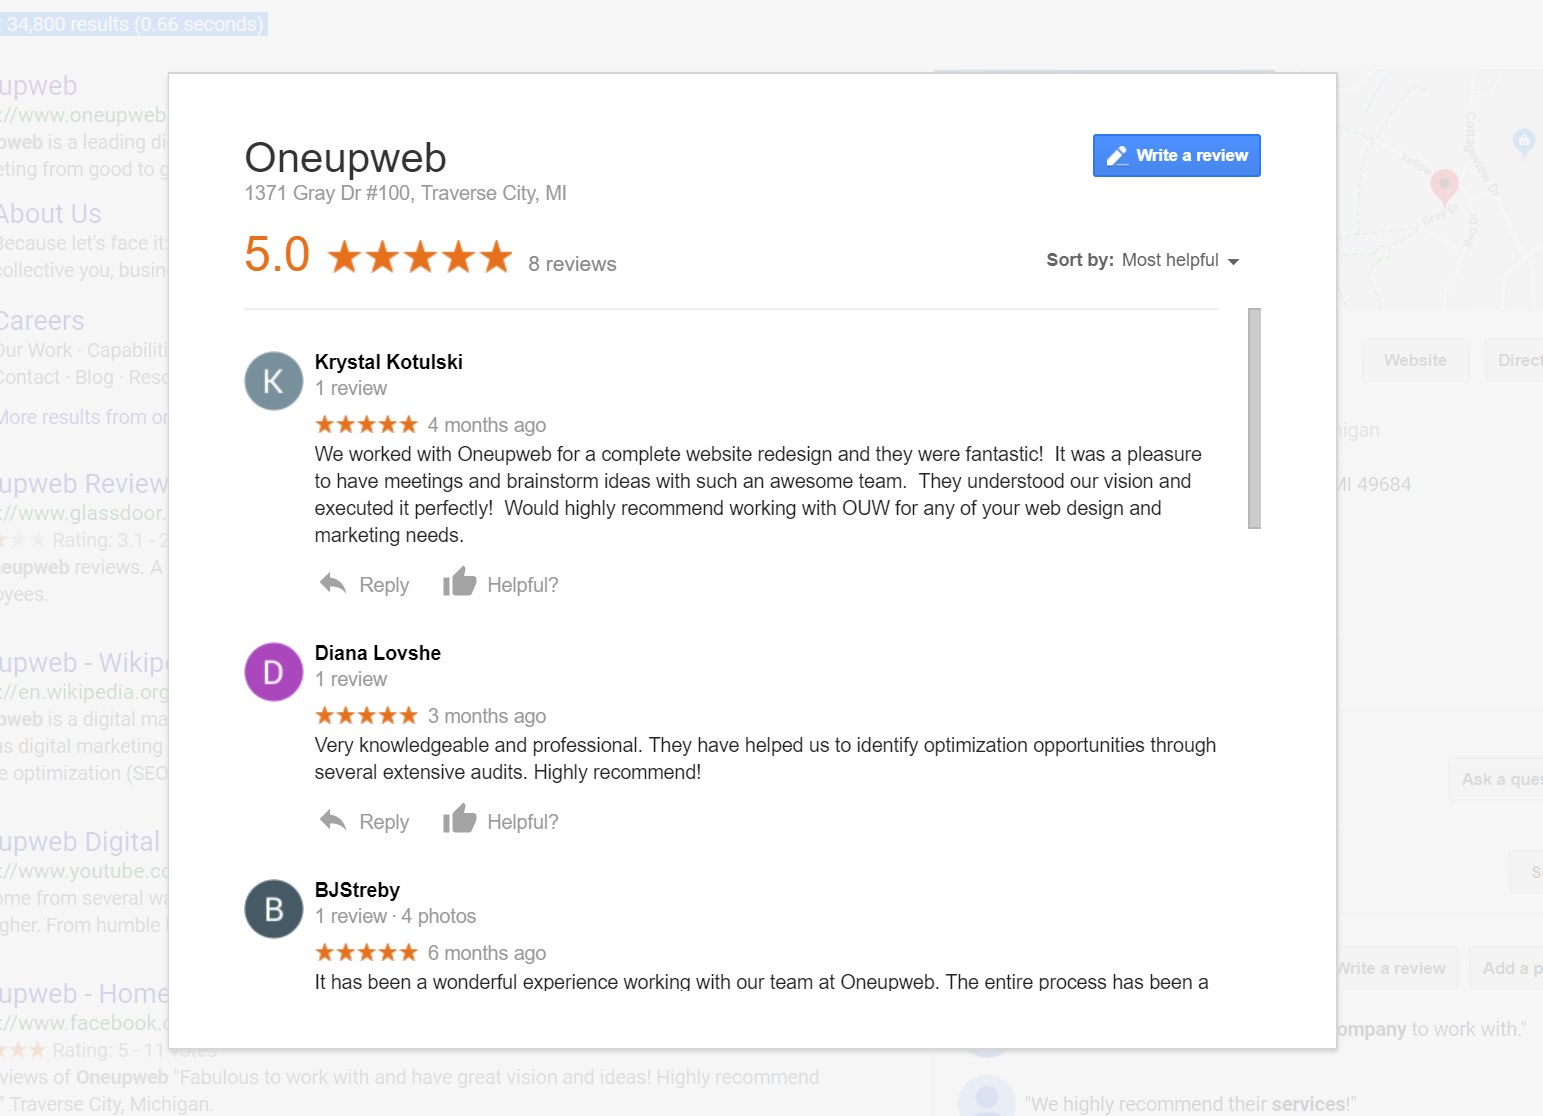 Where and How to Display Google Reviews on Your Website